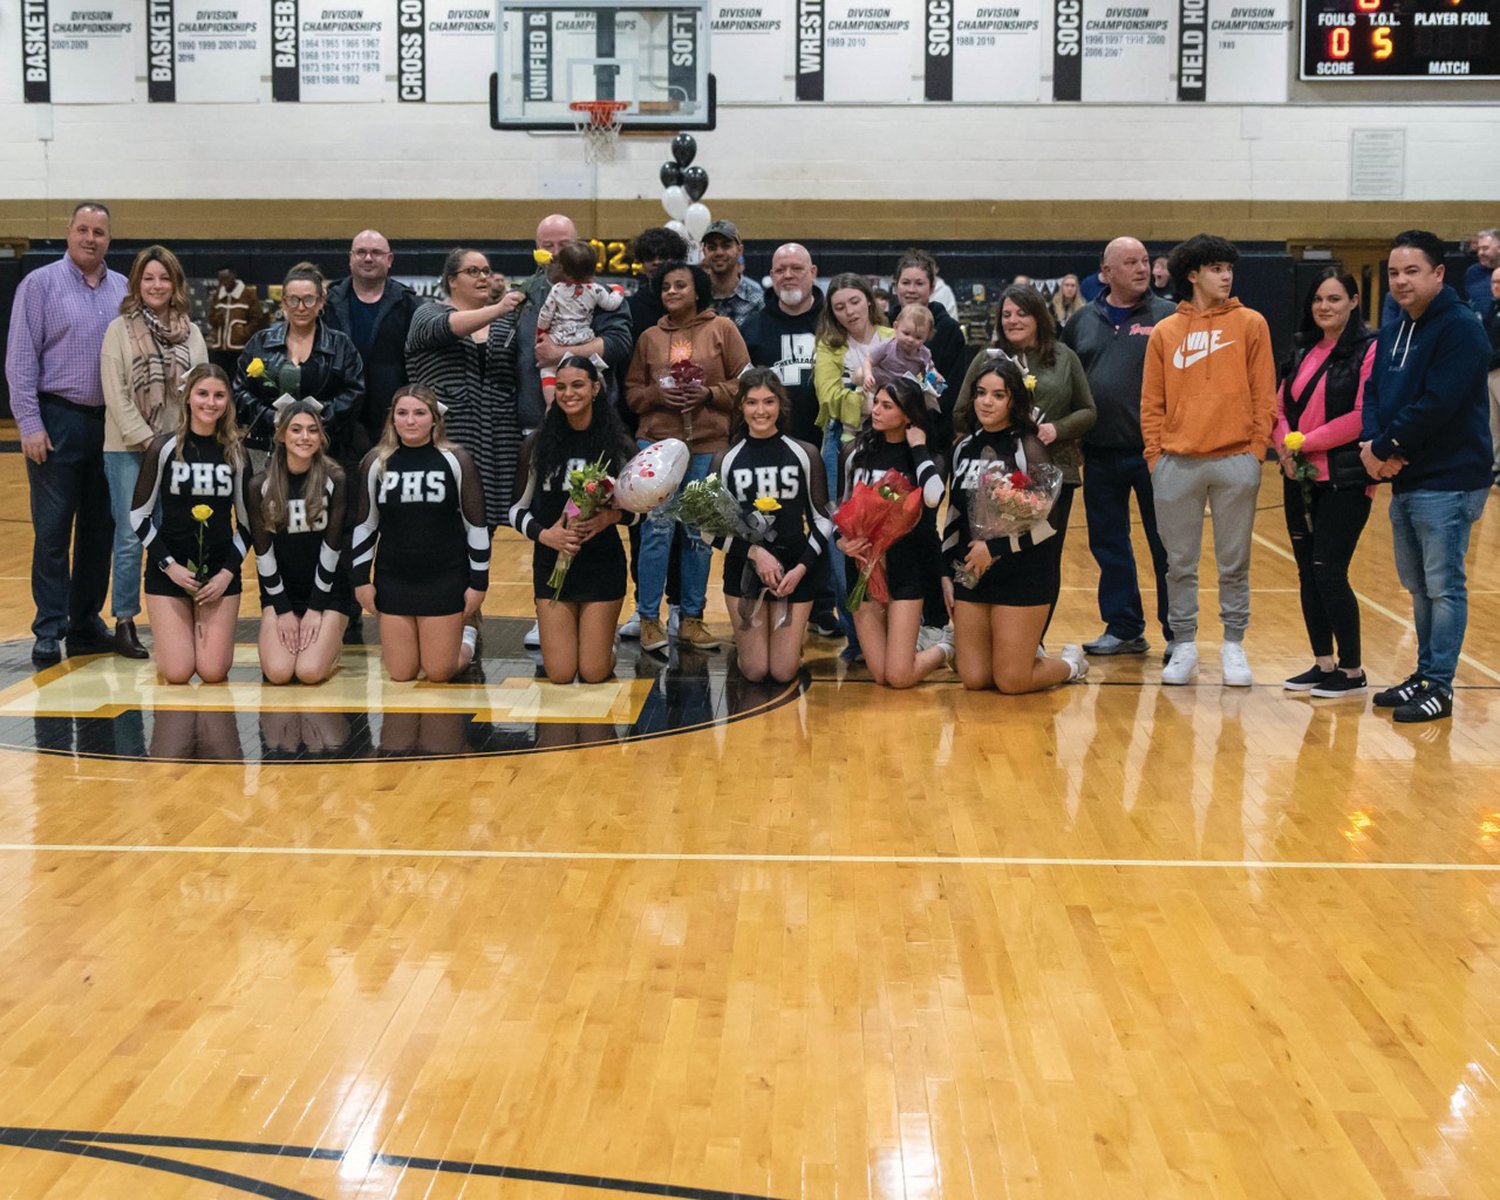 SENIOR NIGHT: Members of the Pilgrim cheerleading team gather at center court with their families during the team’s Senior Night celebration on Tuesday evening.